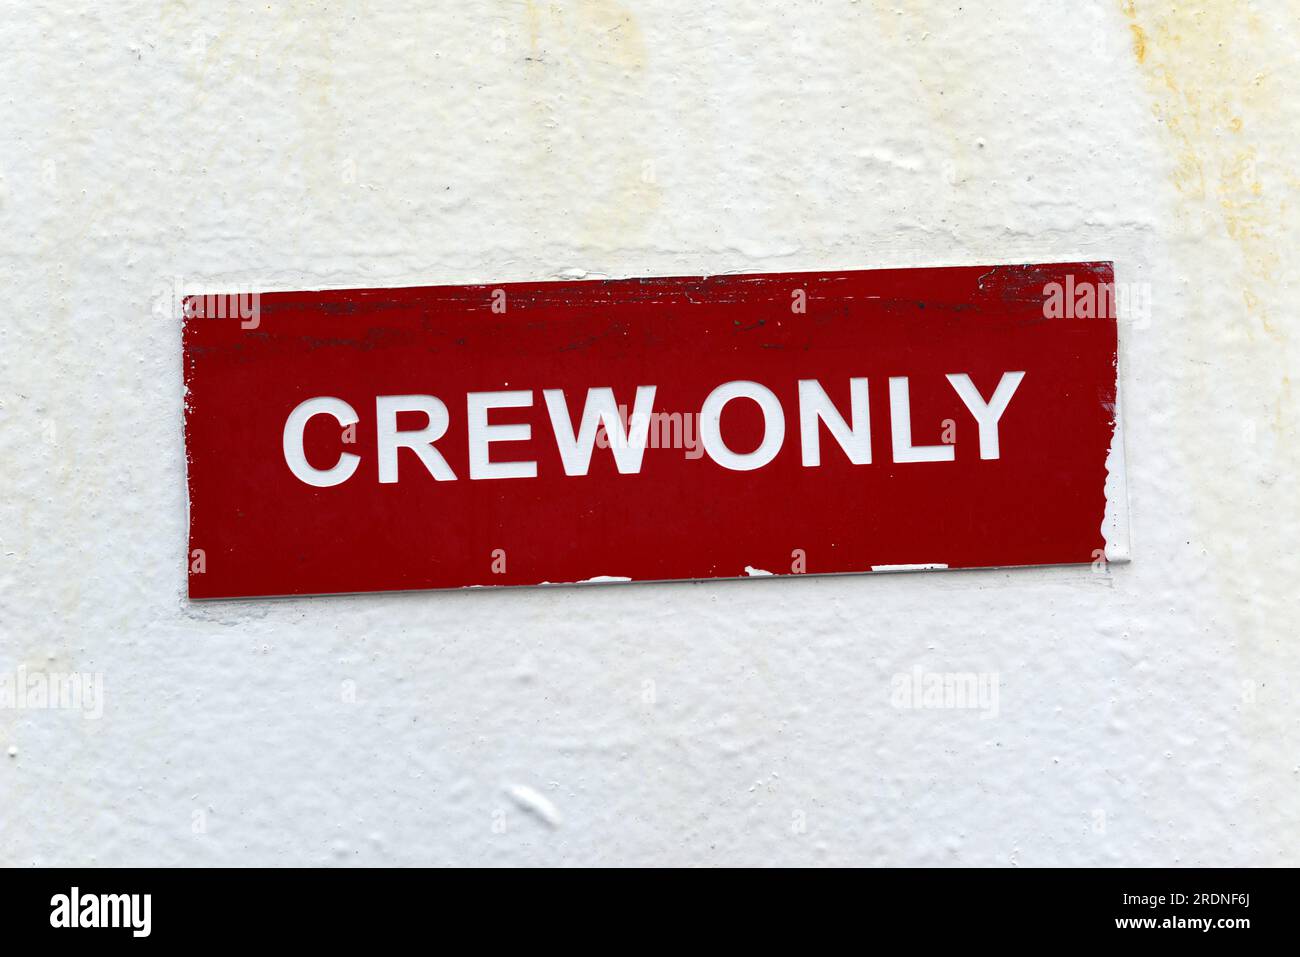 A sign for Crew Only on the Interislander ferry Atarere, New Zealand Stock Photo